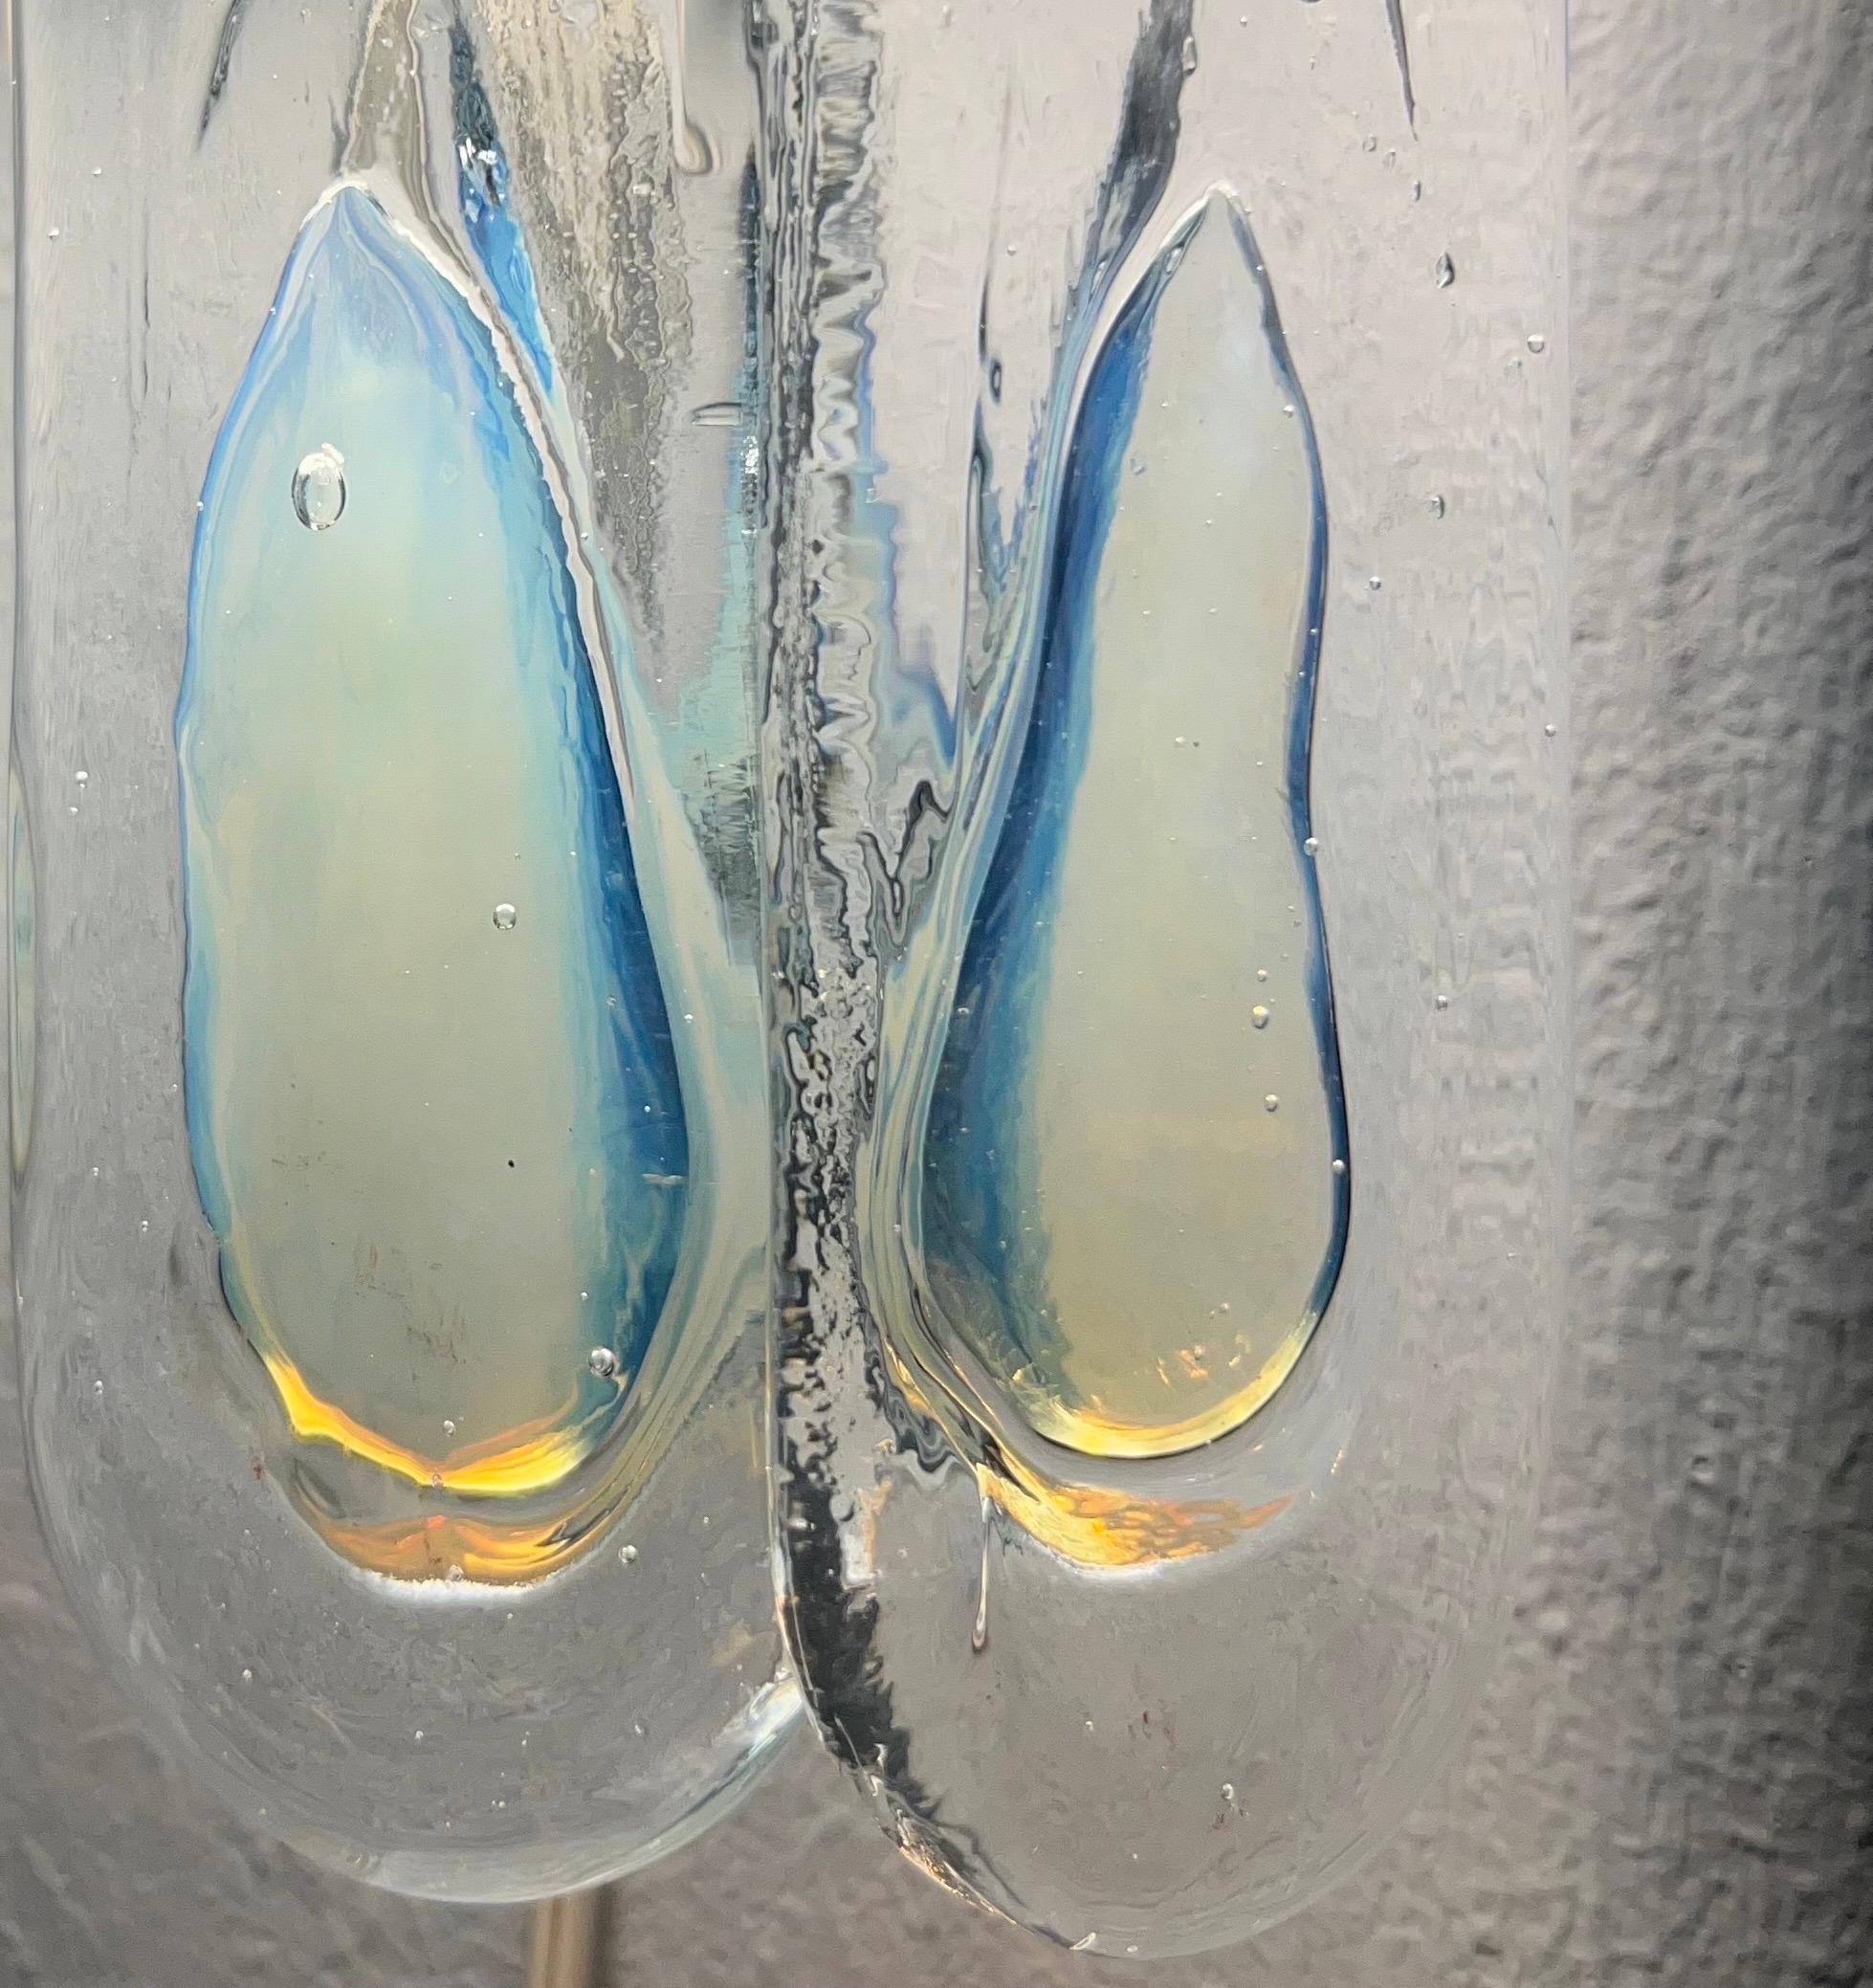 Italian Midcentury Set of Three Iridescent White Wall Sconces by Mazzega, 1970s For Sale 11